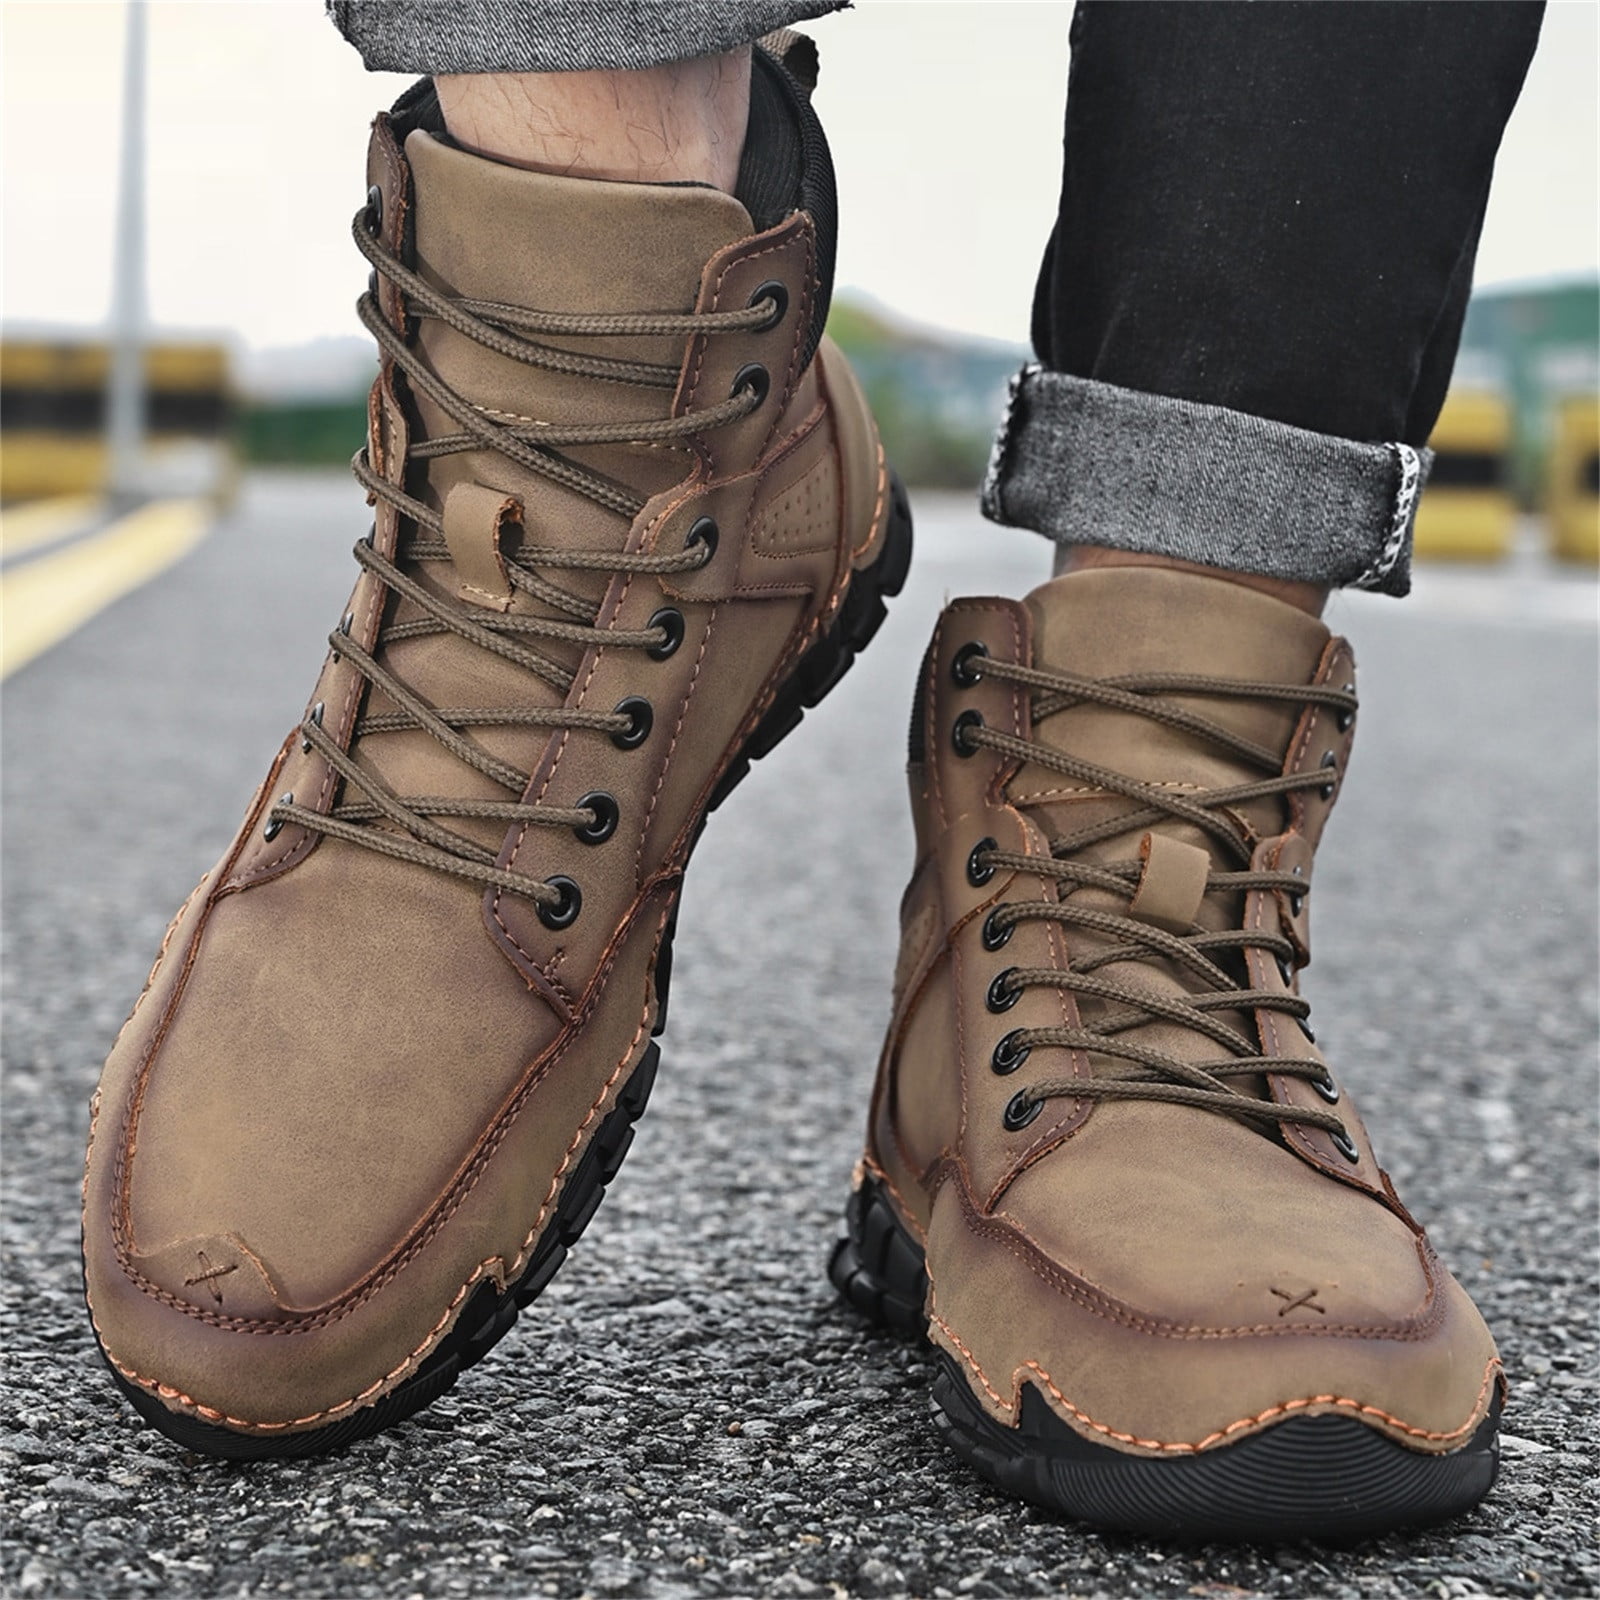 Tawop Motorcycle Boots,Men'S Casual High-Top Leather Shoes Warm Short Boots,  Trendy Men'S Shoes Go Go Boots Women Wide Calf Knee High Boots For Women 